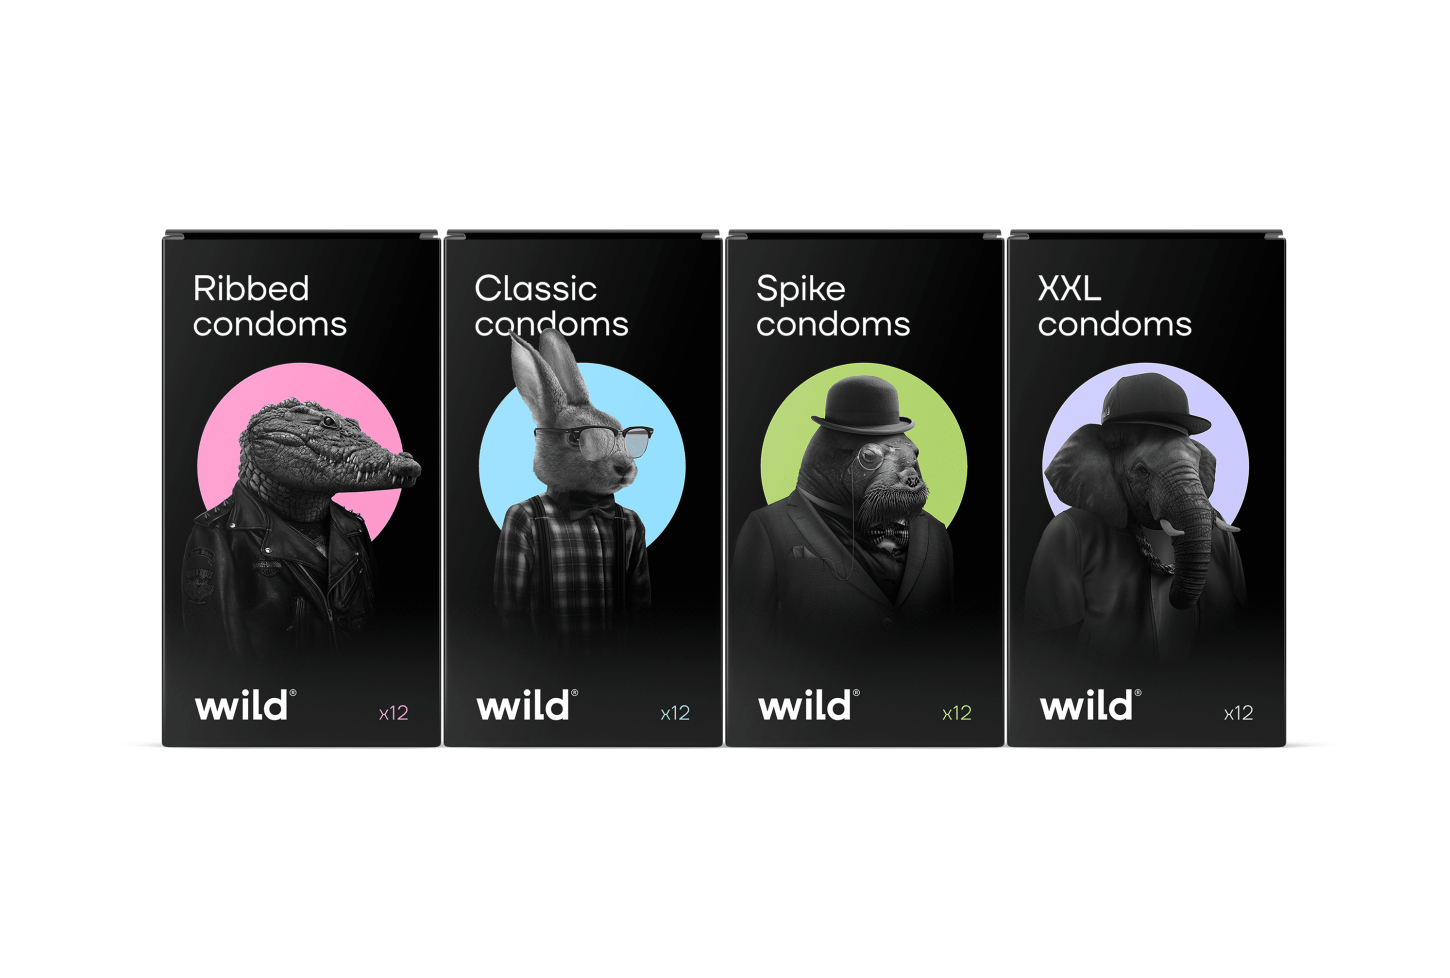 Wild Comdom Package Concept